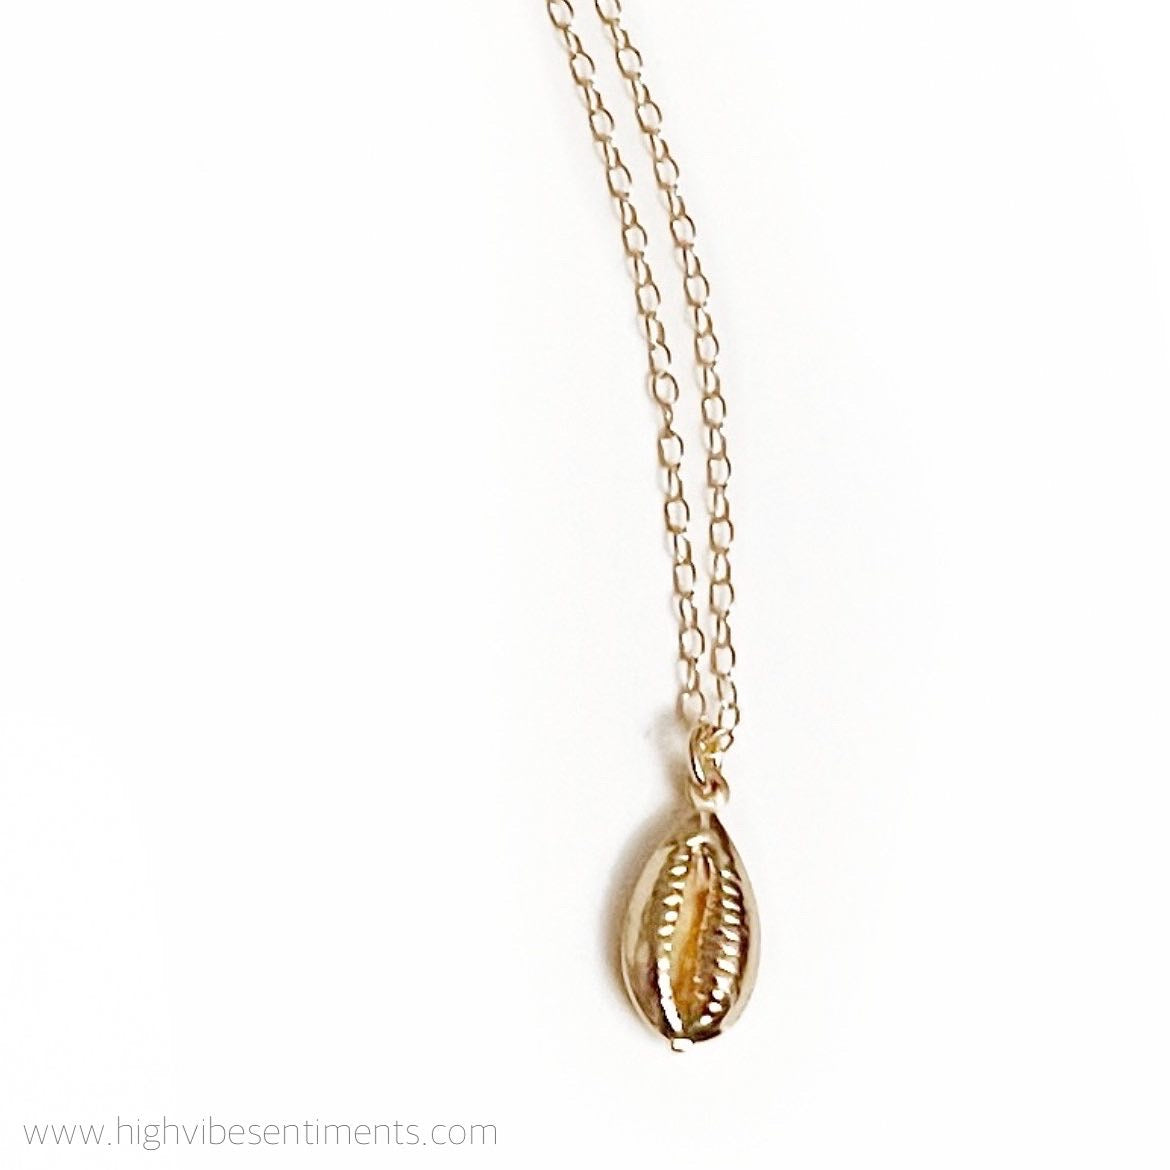 High Vibe Sentiments, For Keeps Cowrie Necklace